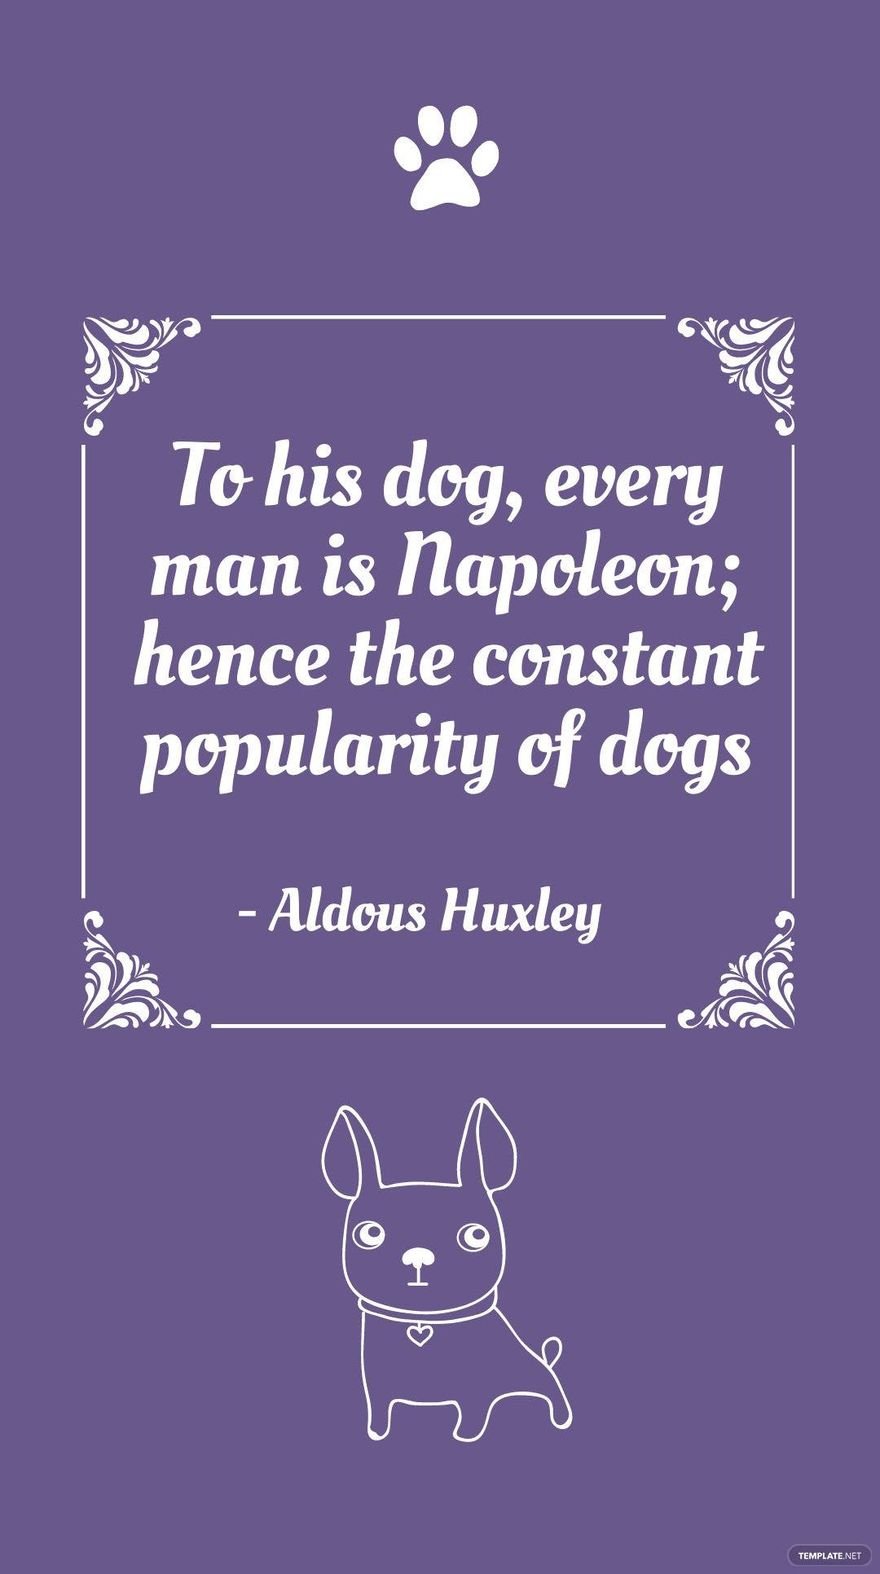 Free Aldous Huxley - To his dog, every man is Napoleon; hence the constant popularity of dogs